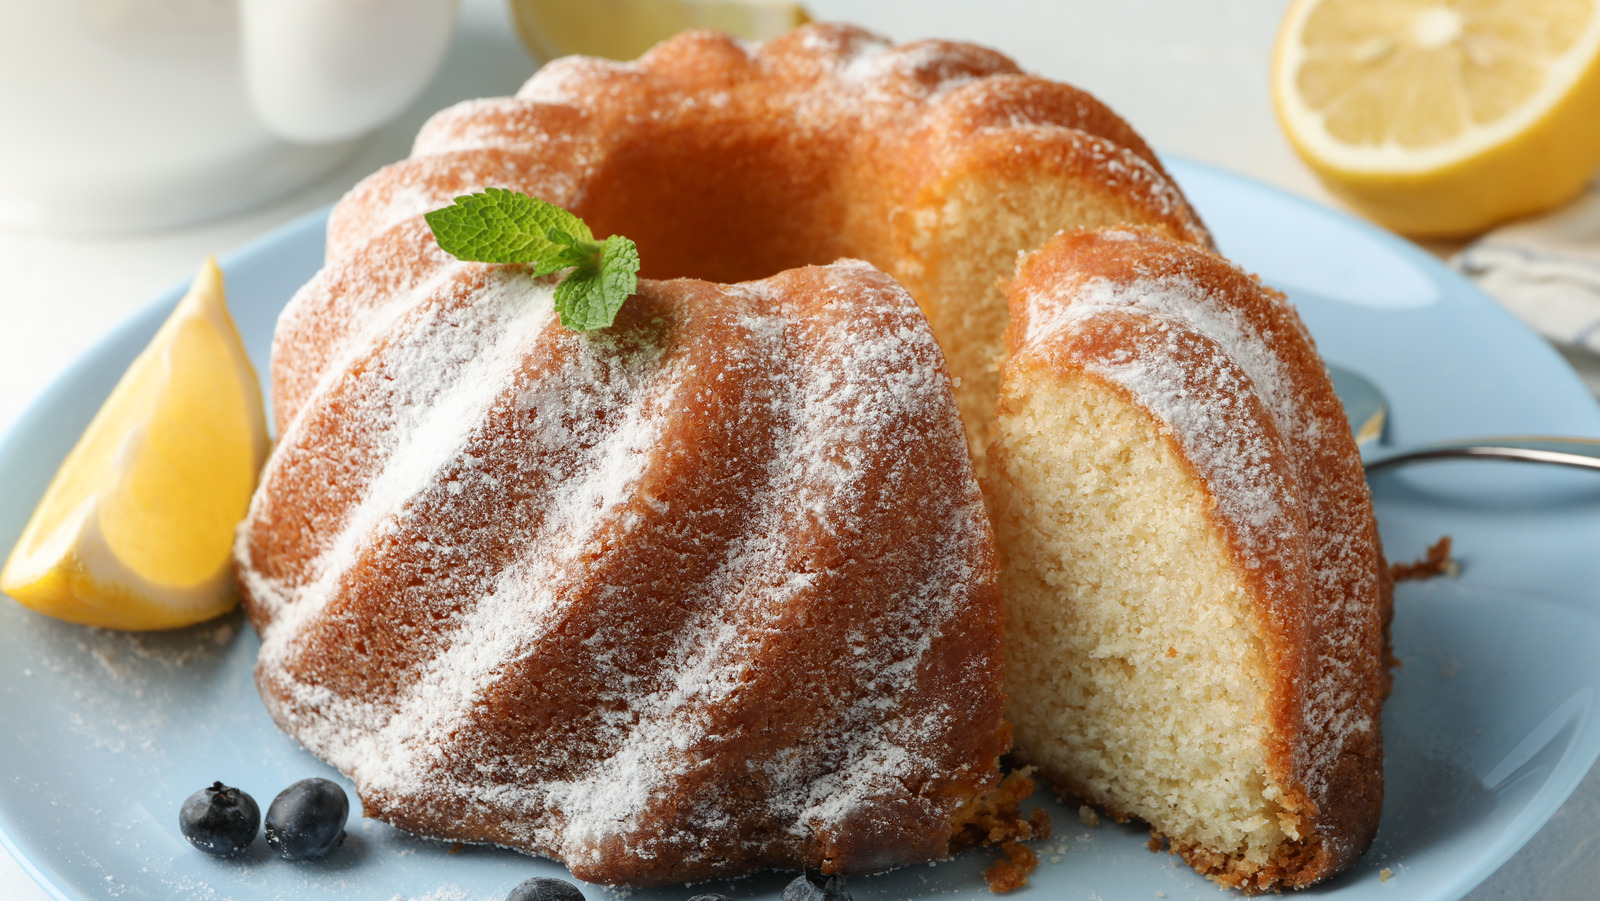 https://www.tastingtable.com/img/gallery/the-original-bundt-pans-weighed-over-15-pounds/l-intro-1669756871.jpg